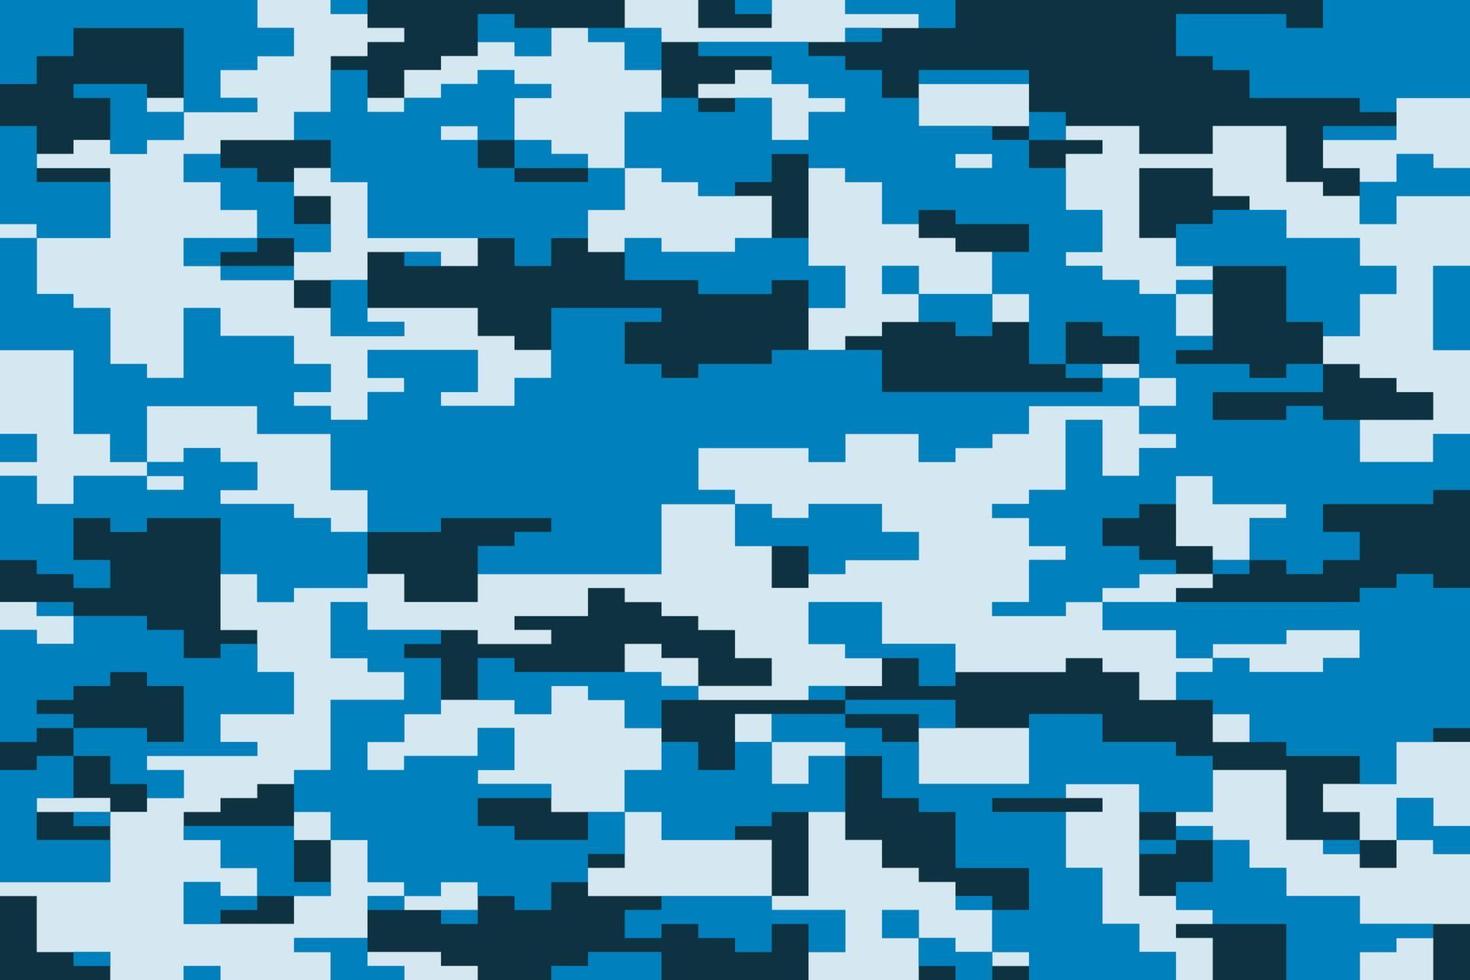 Pixelated military marine camouflage seamless pattern texture. Abstract digital pixel bit blue tileable background illustration vector